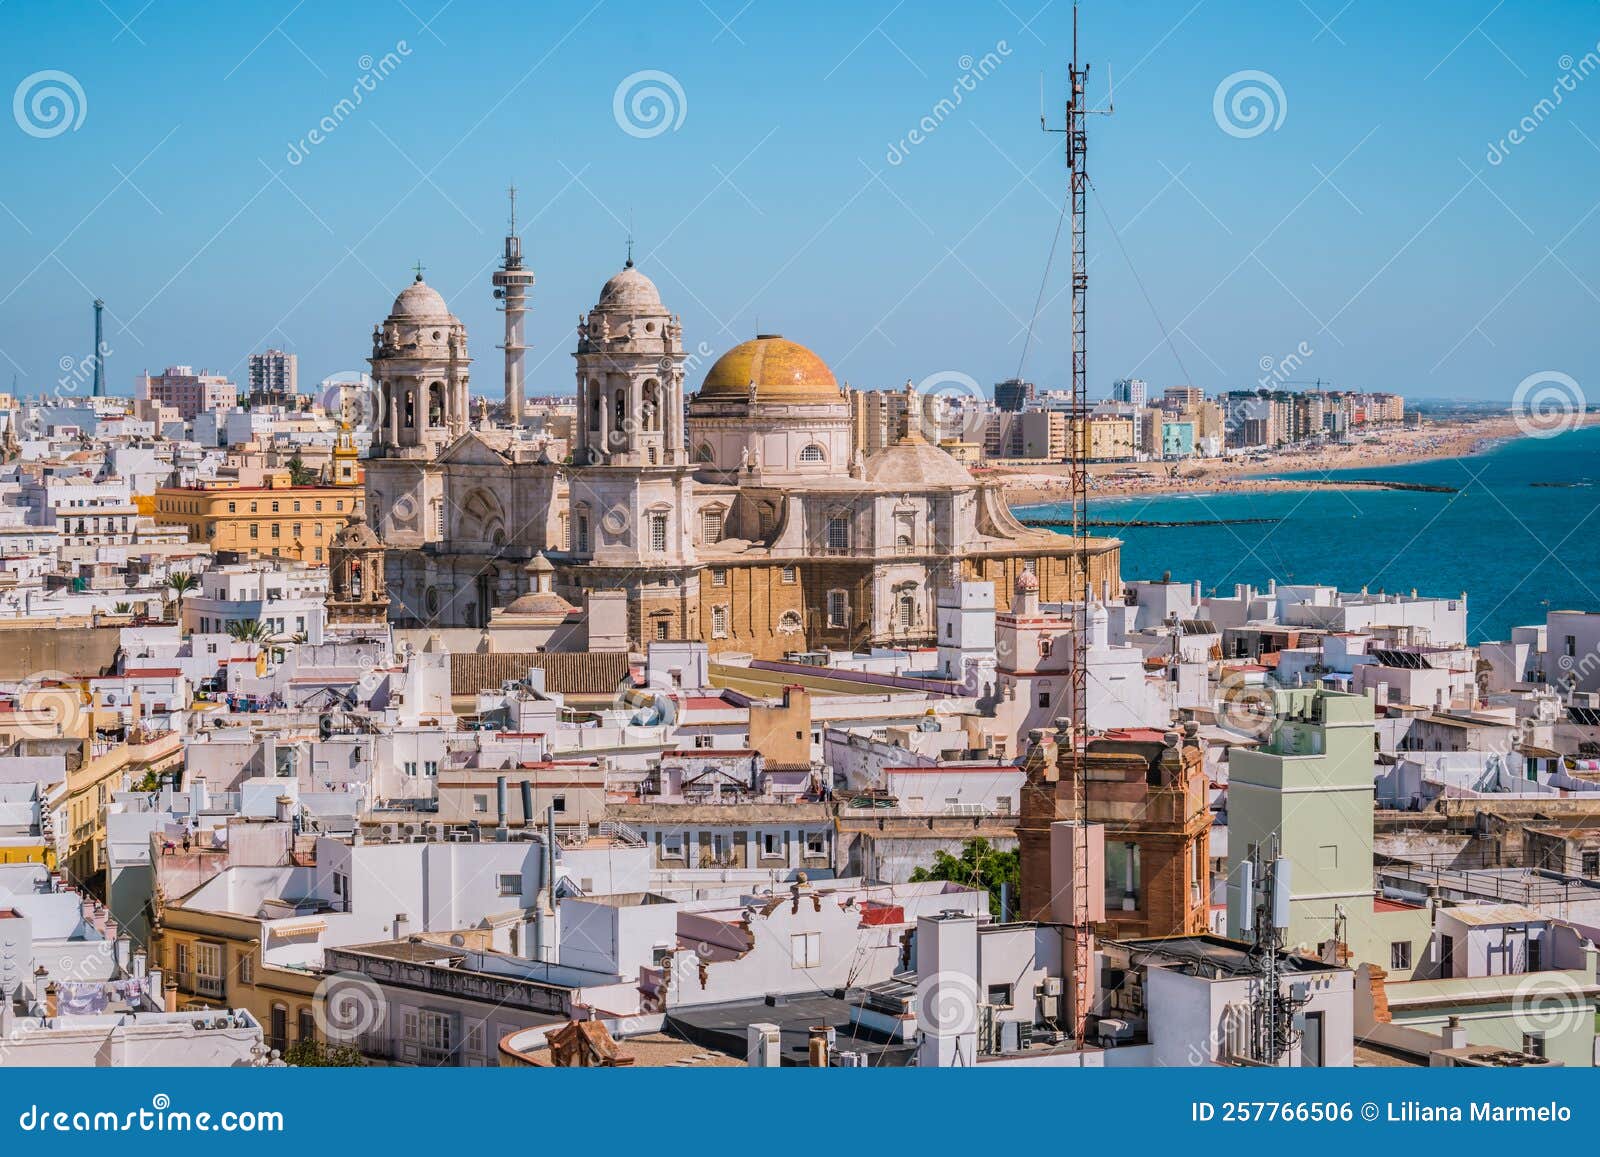 rooftops of houses in aerial view of the medieval city of cÃÂ¡diz and towers and cupula of cathedral de la santa cruz in seafront